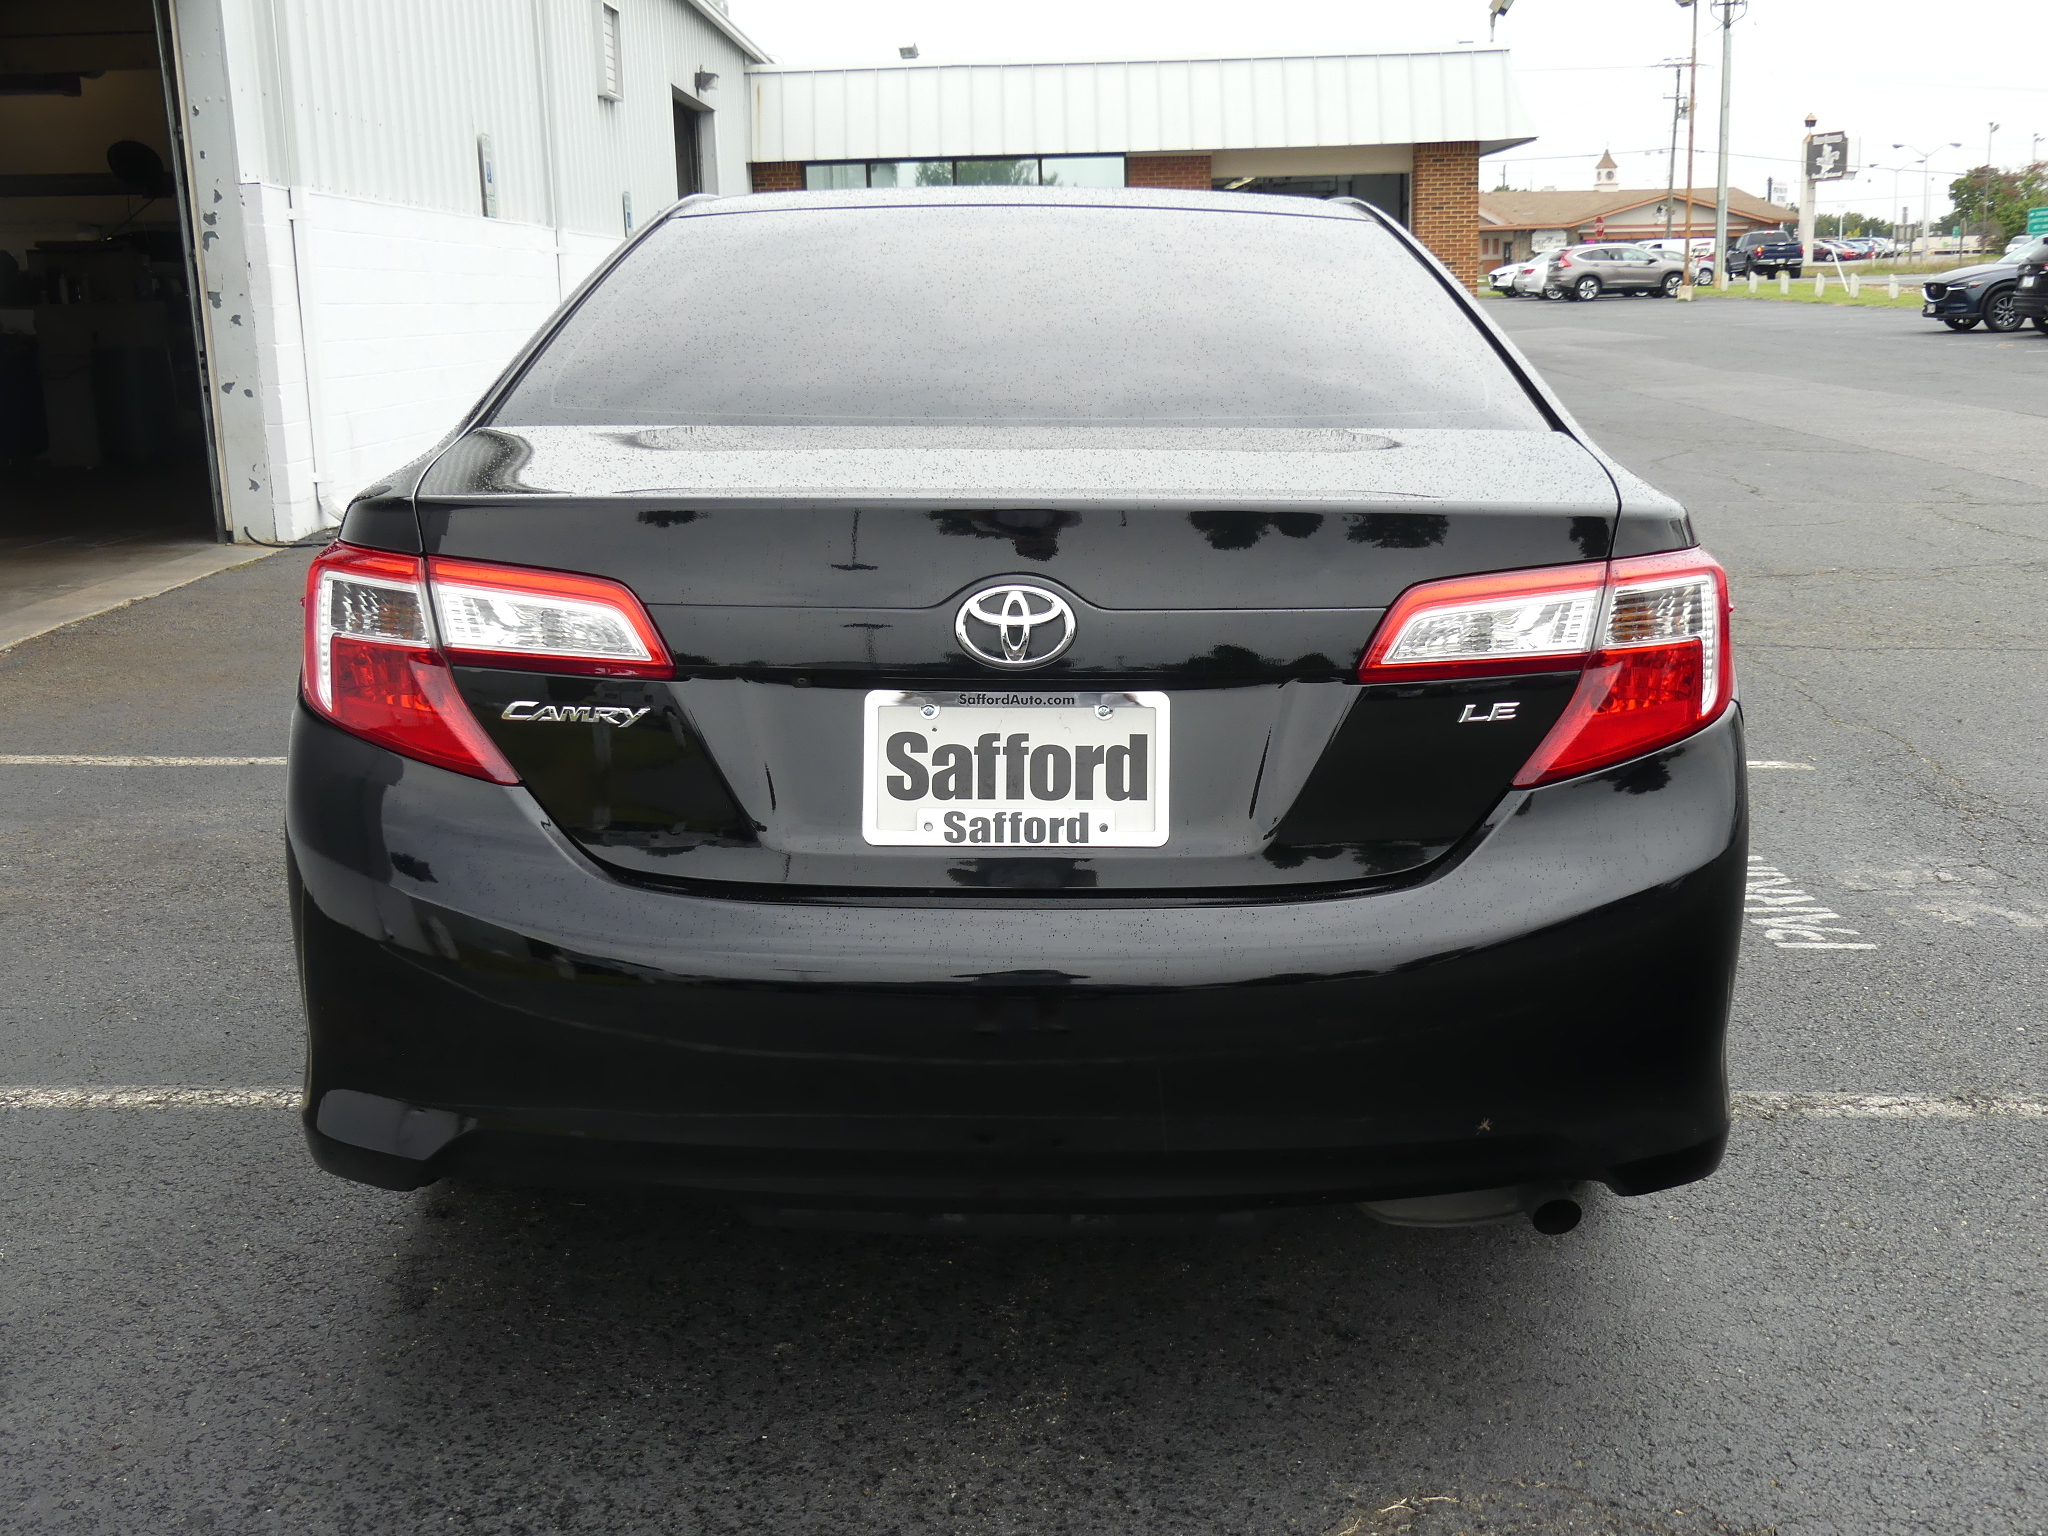 Pre-Owned 2014 Toyota Camry 4dr Sdn I4 Auto LE (Natl) *Ltd Avail* 4dr ...
